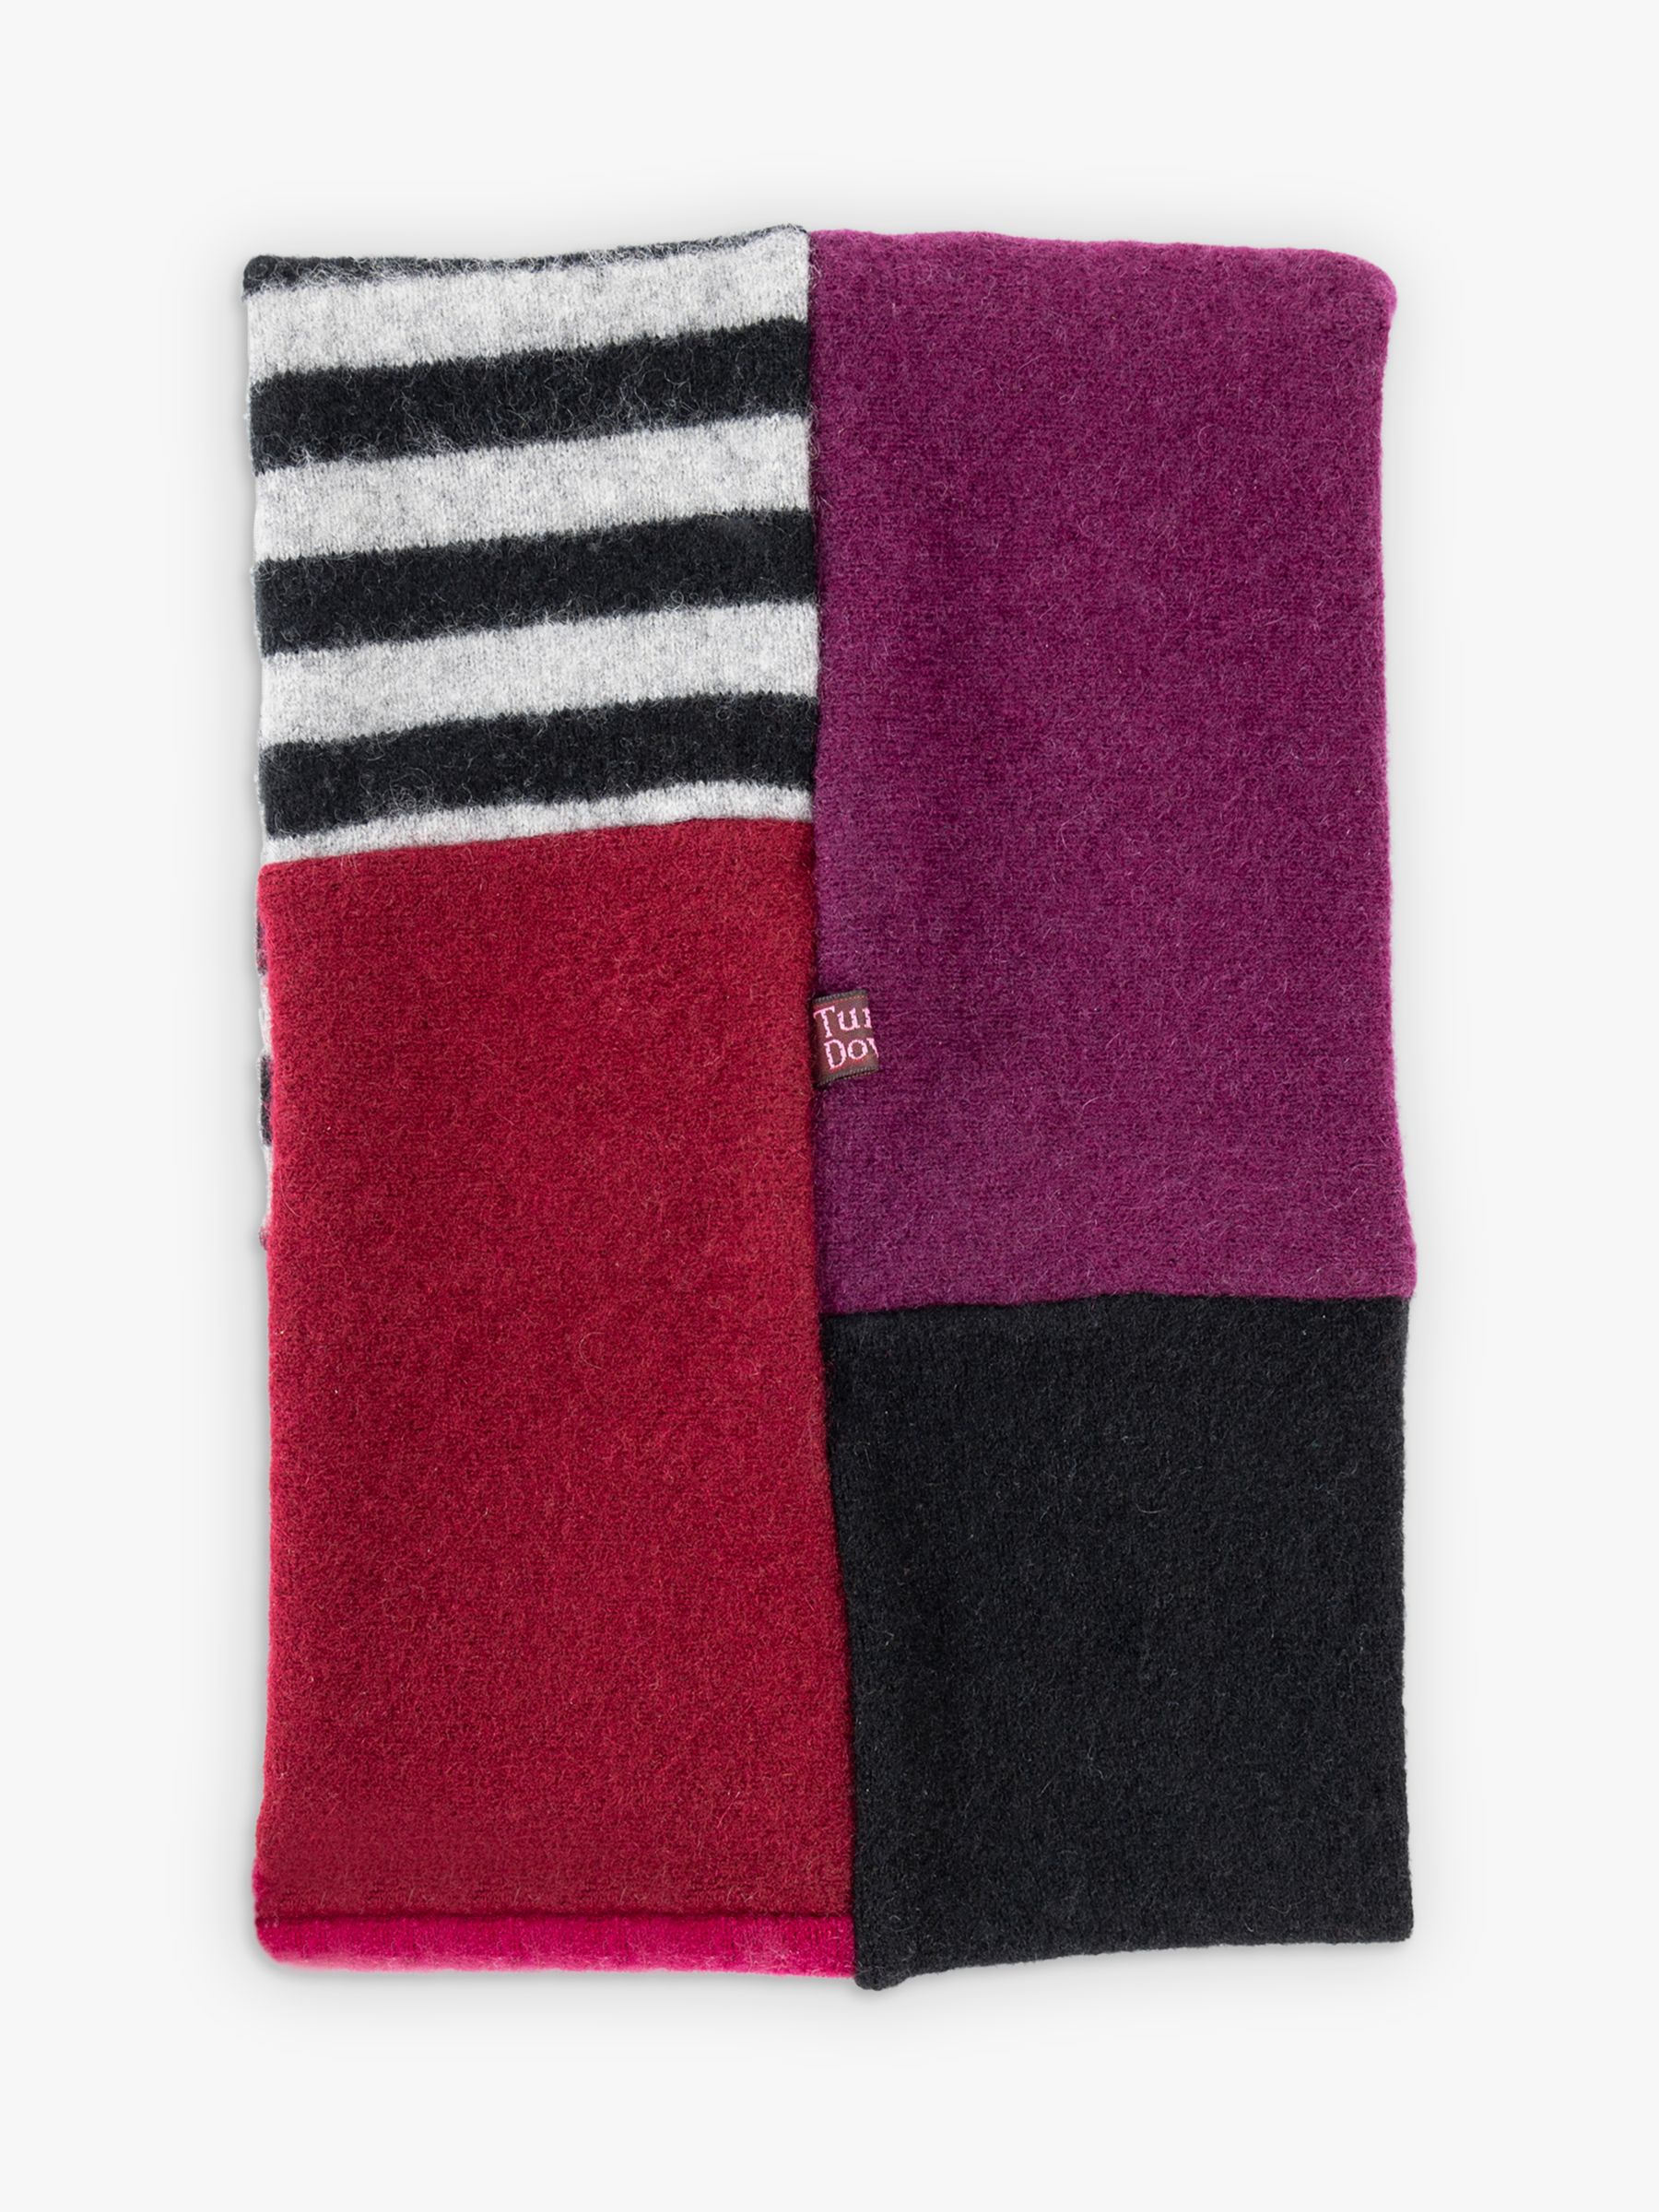 Buy Celtic & Co. Recycled Cashmere Neckwarmer, Mixed Reds Online at johnlewis.com